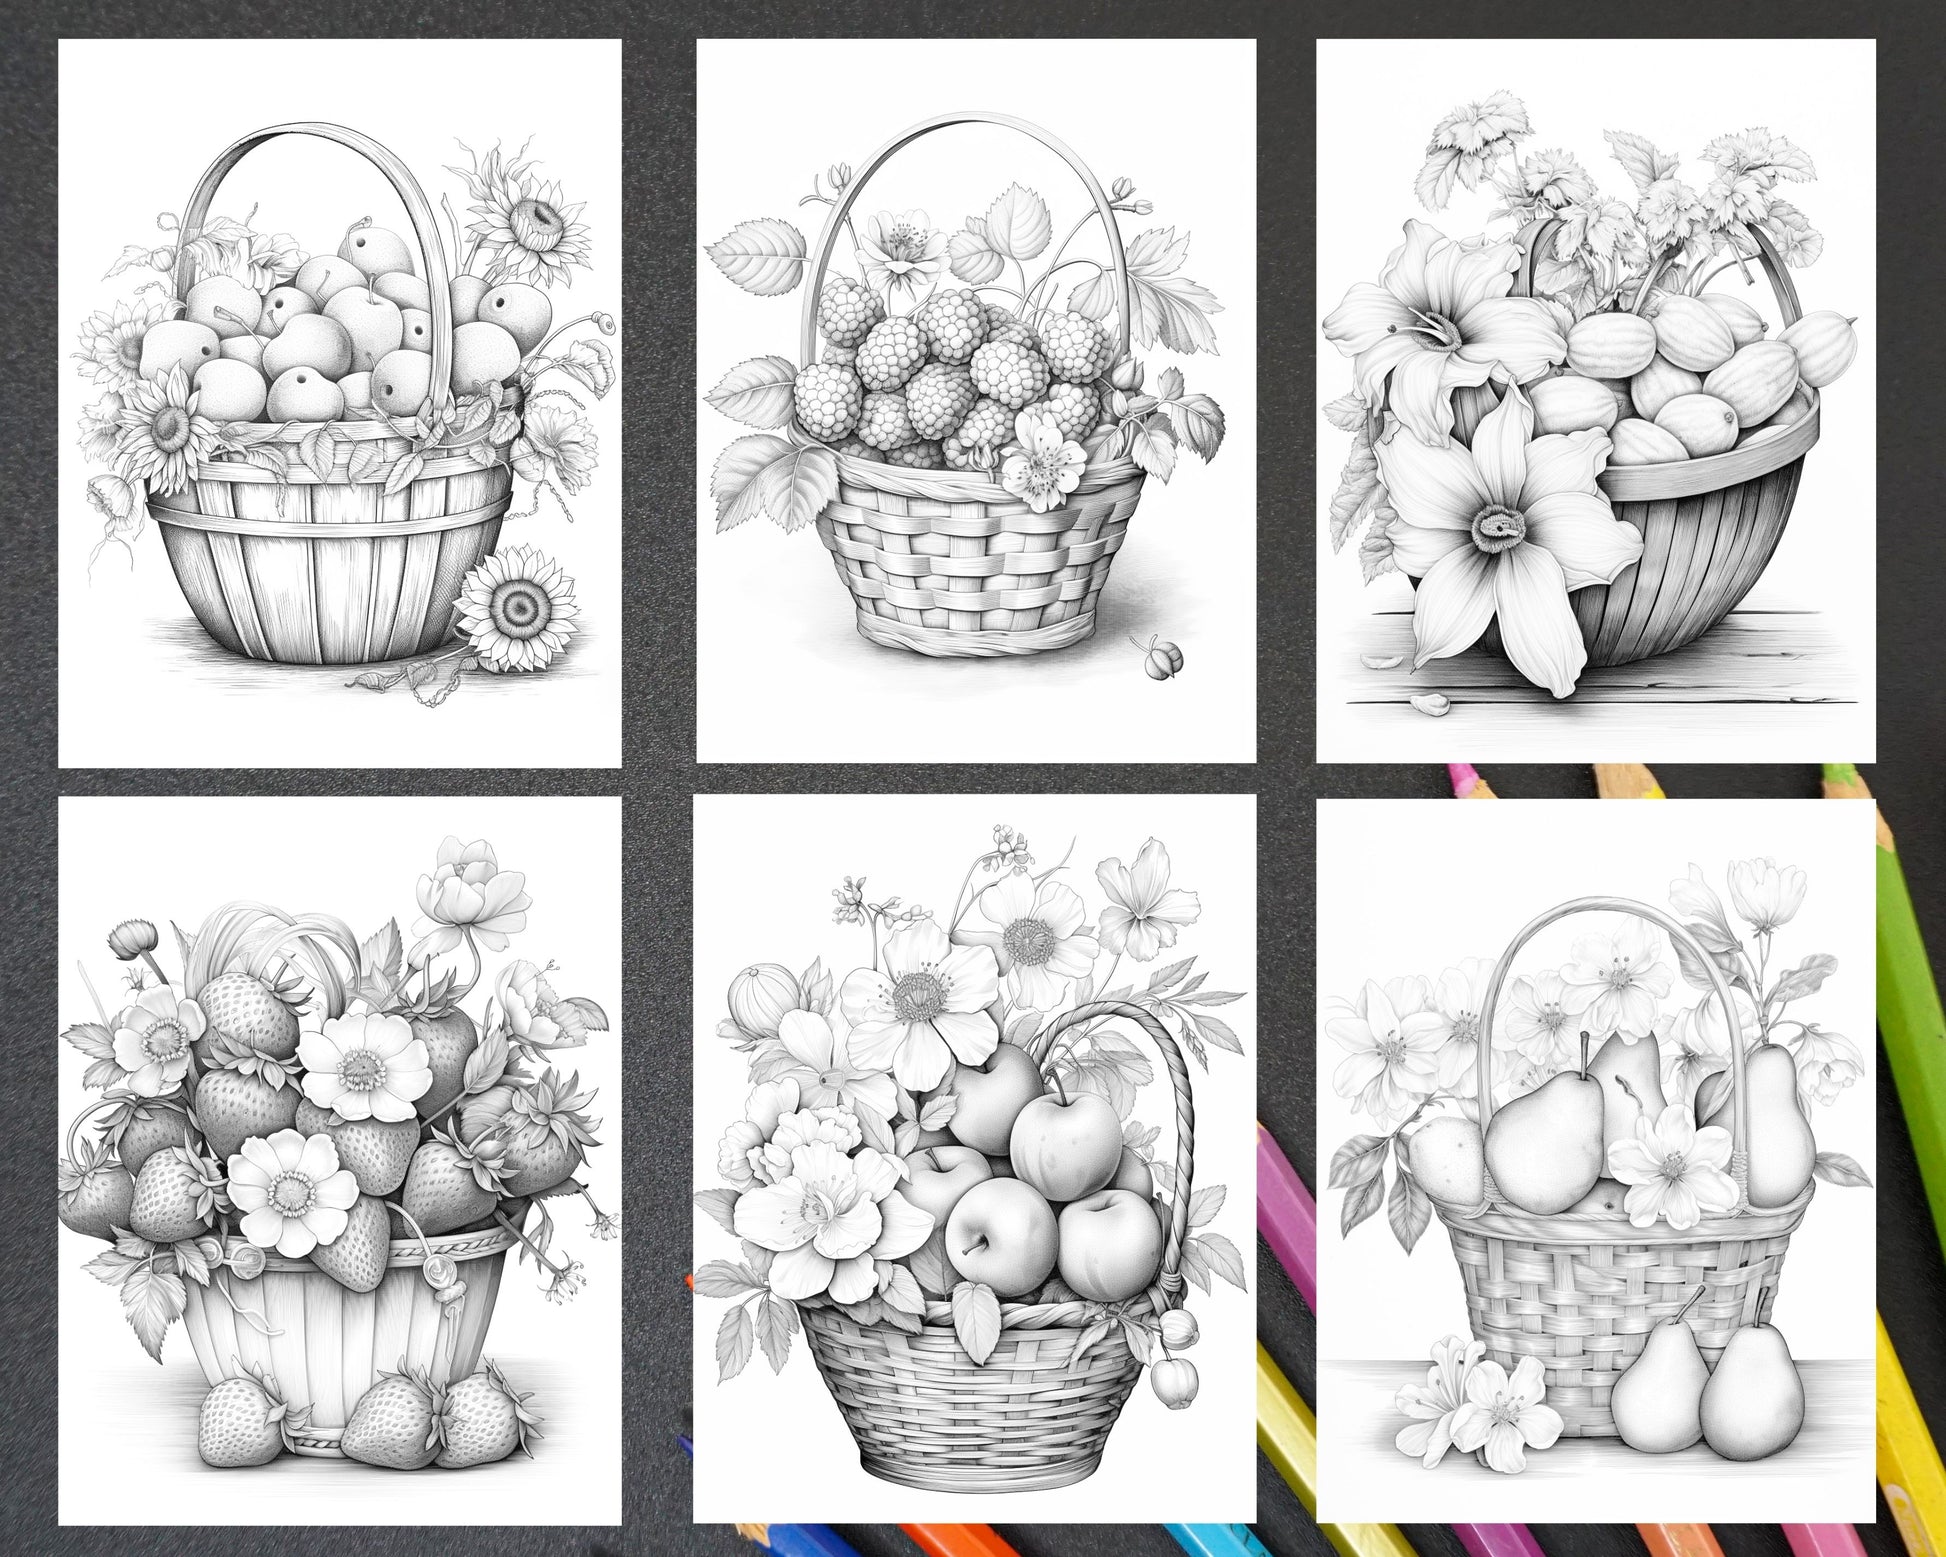 Grayscale Fruit Basket Coloring Pages, Printable Adult Coloring Sheets, Detailed Fruit Illustrations, Stress Relief Coloring Book, Instant Download Coloring Pages, Mindful Coloring Activities, DIY Coloring Fun